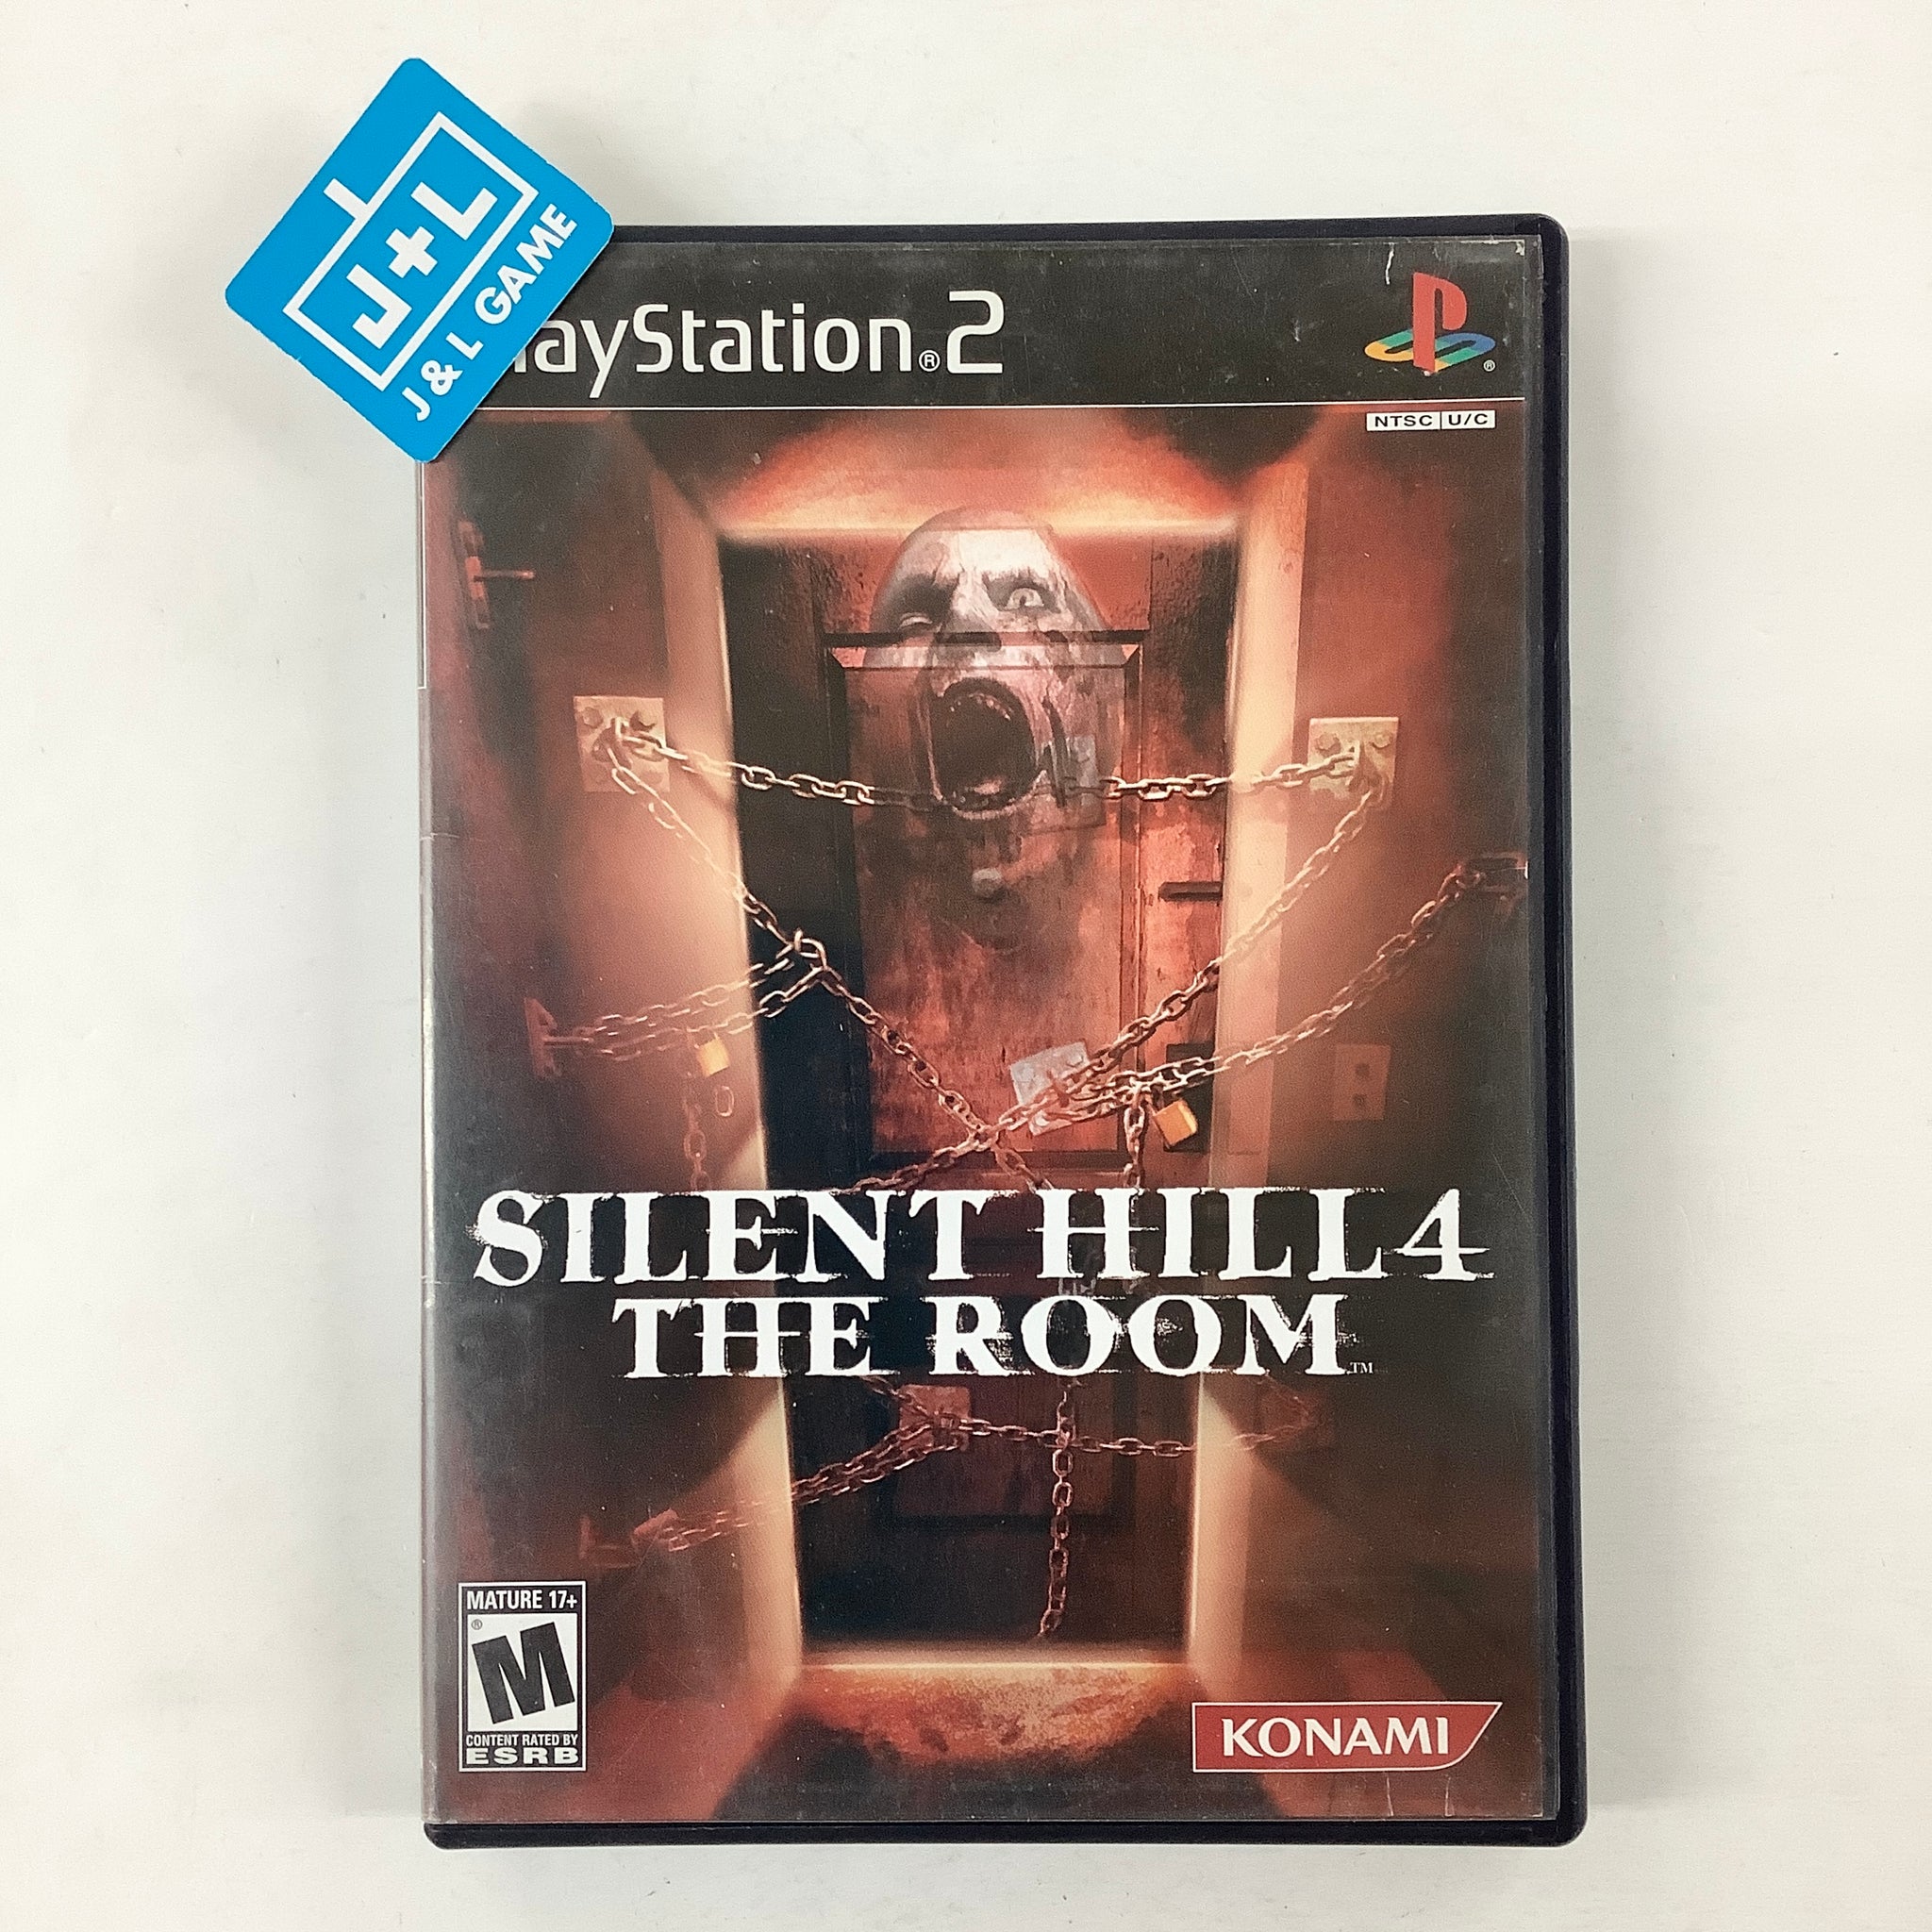 Silent Hill Games for PS2 